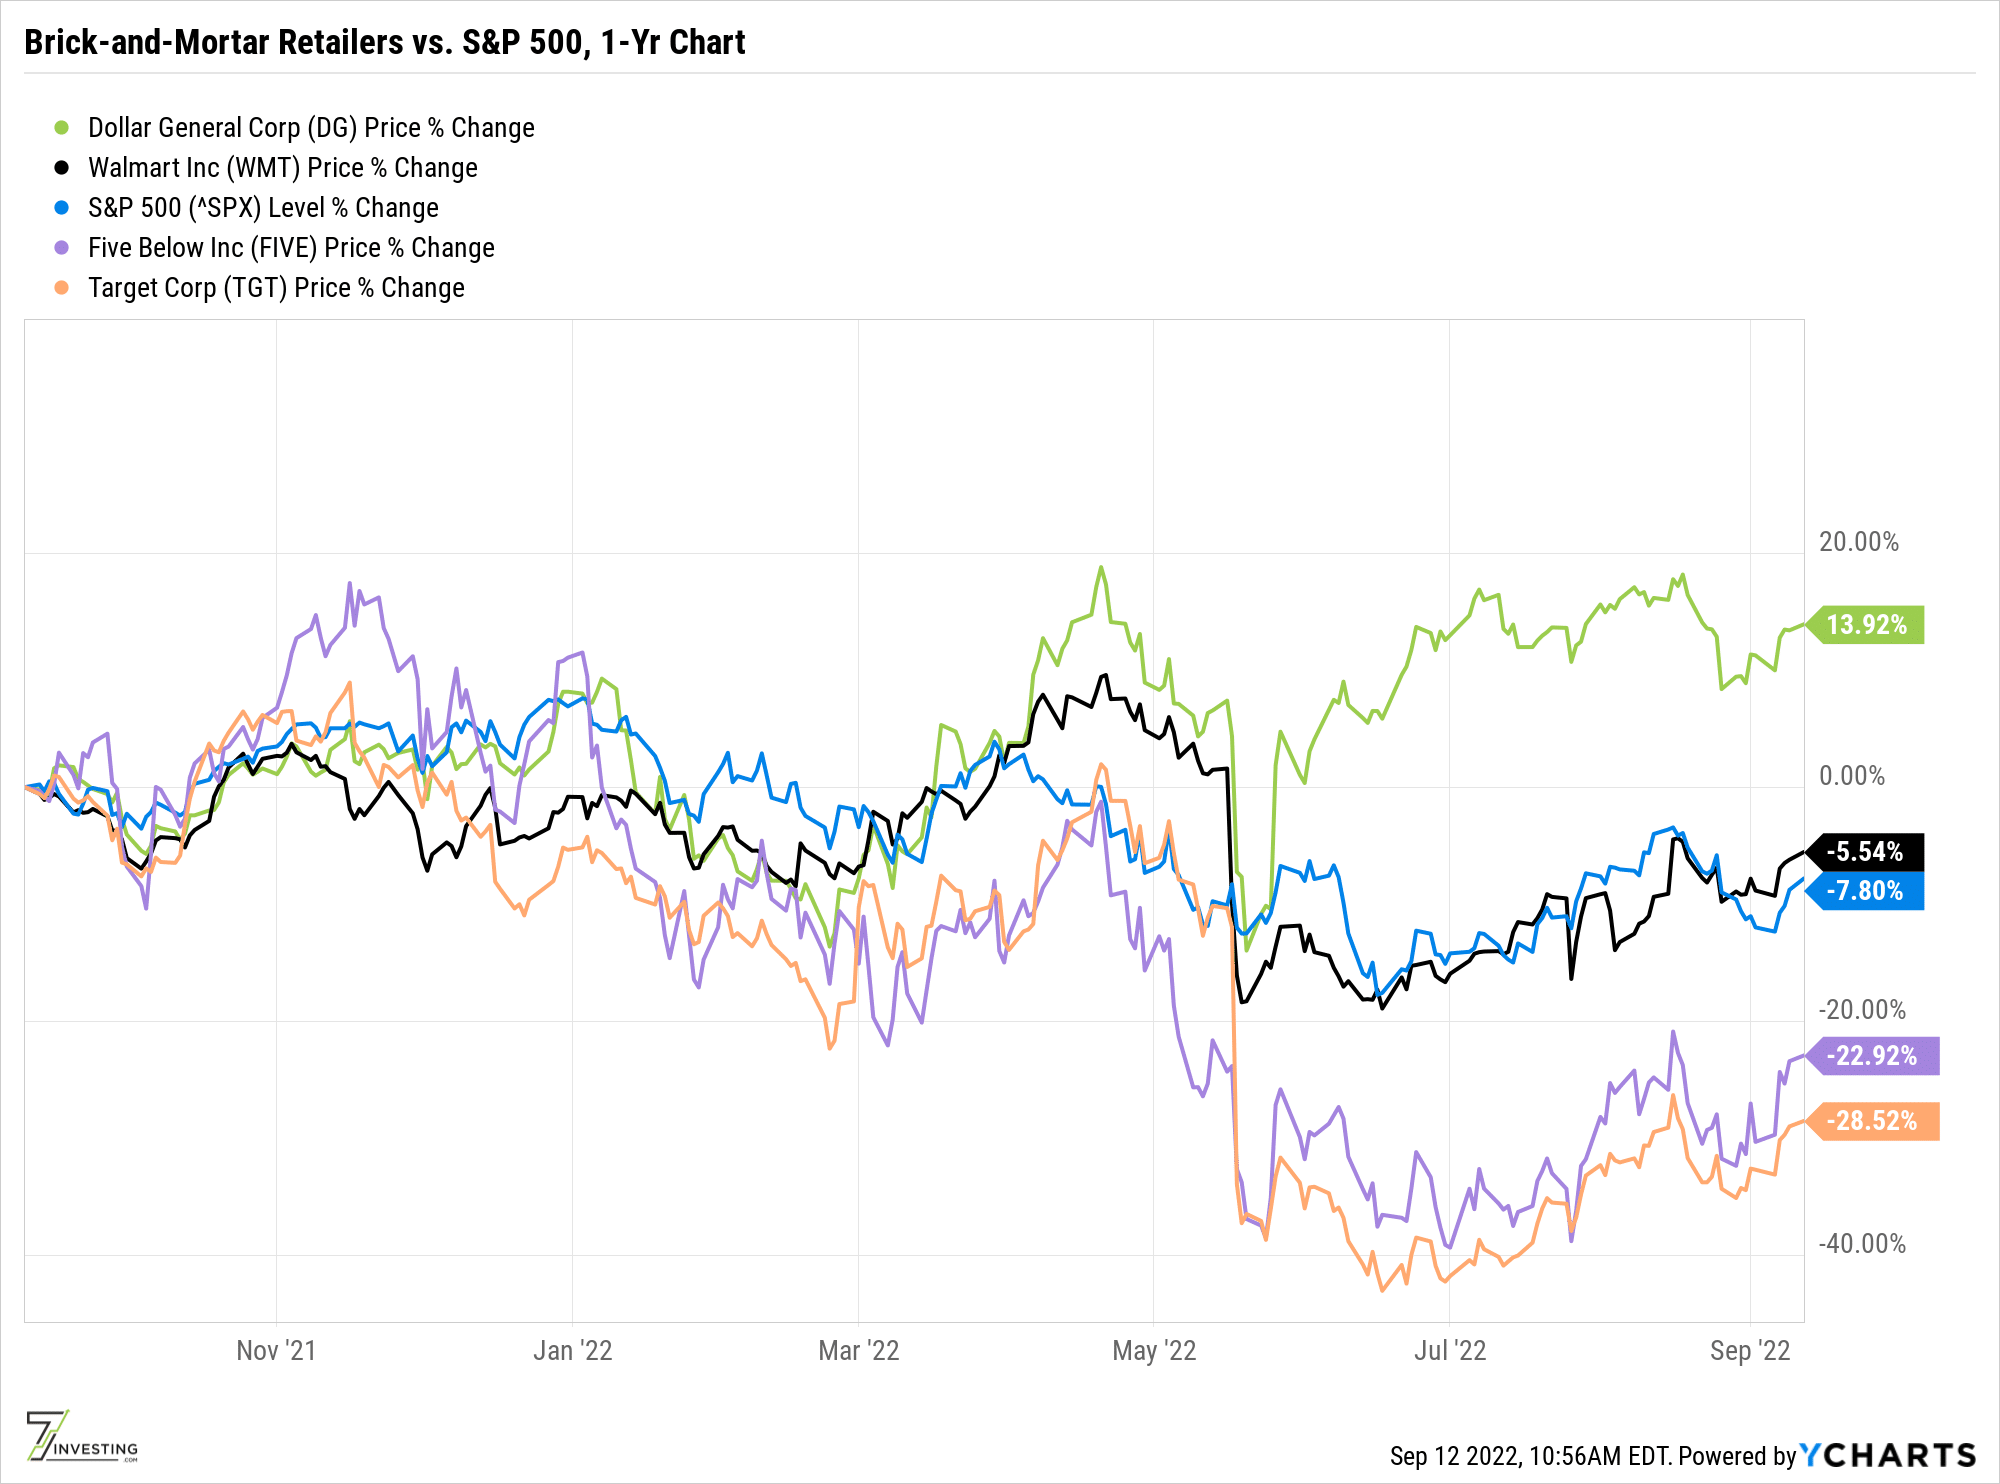 Graph showing the stock returns of Walmart, Target, Dollar General, and Five Below over a one year period compared to the S&P 500.